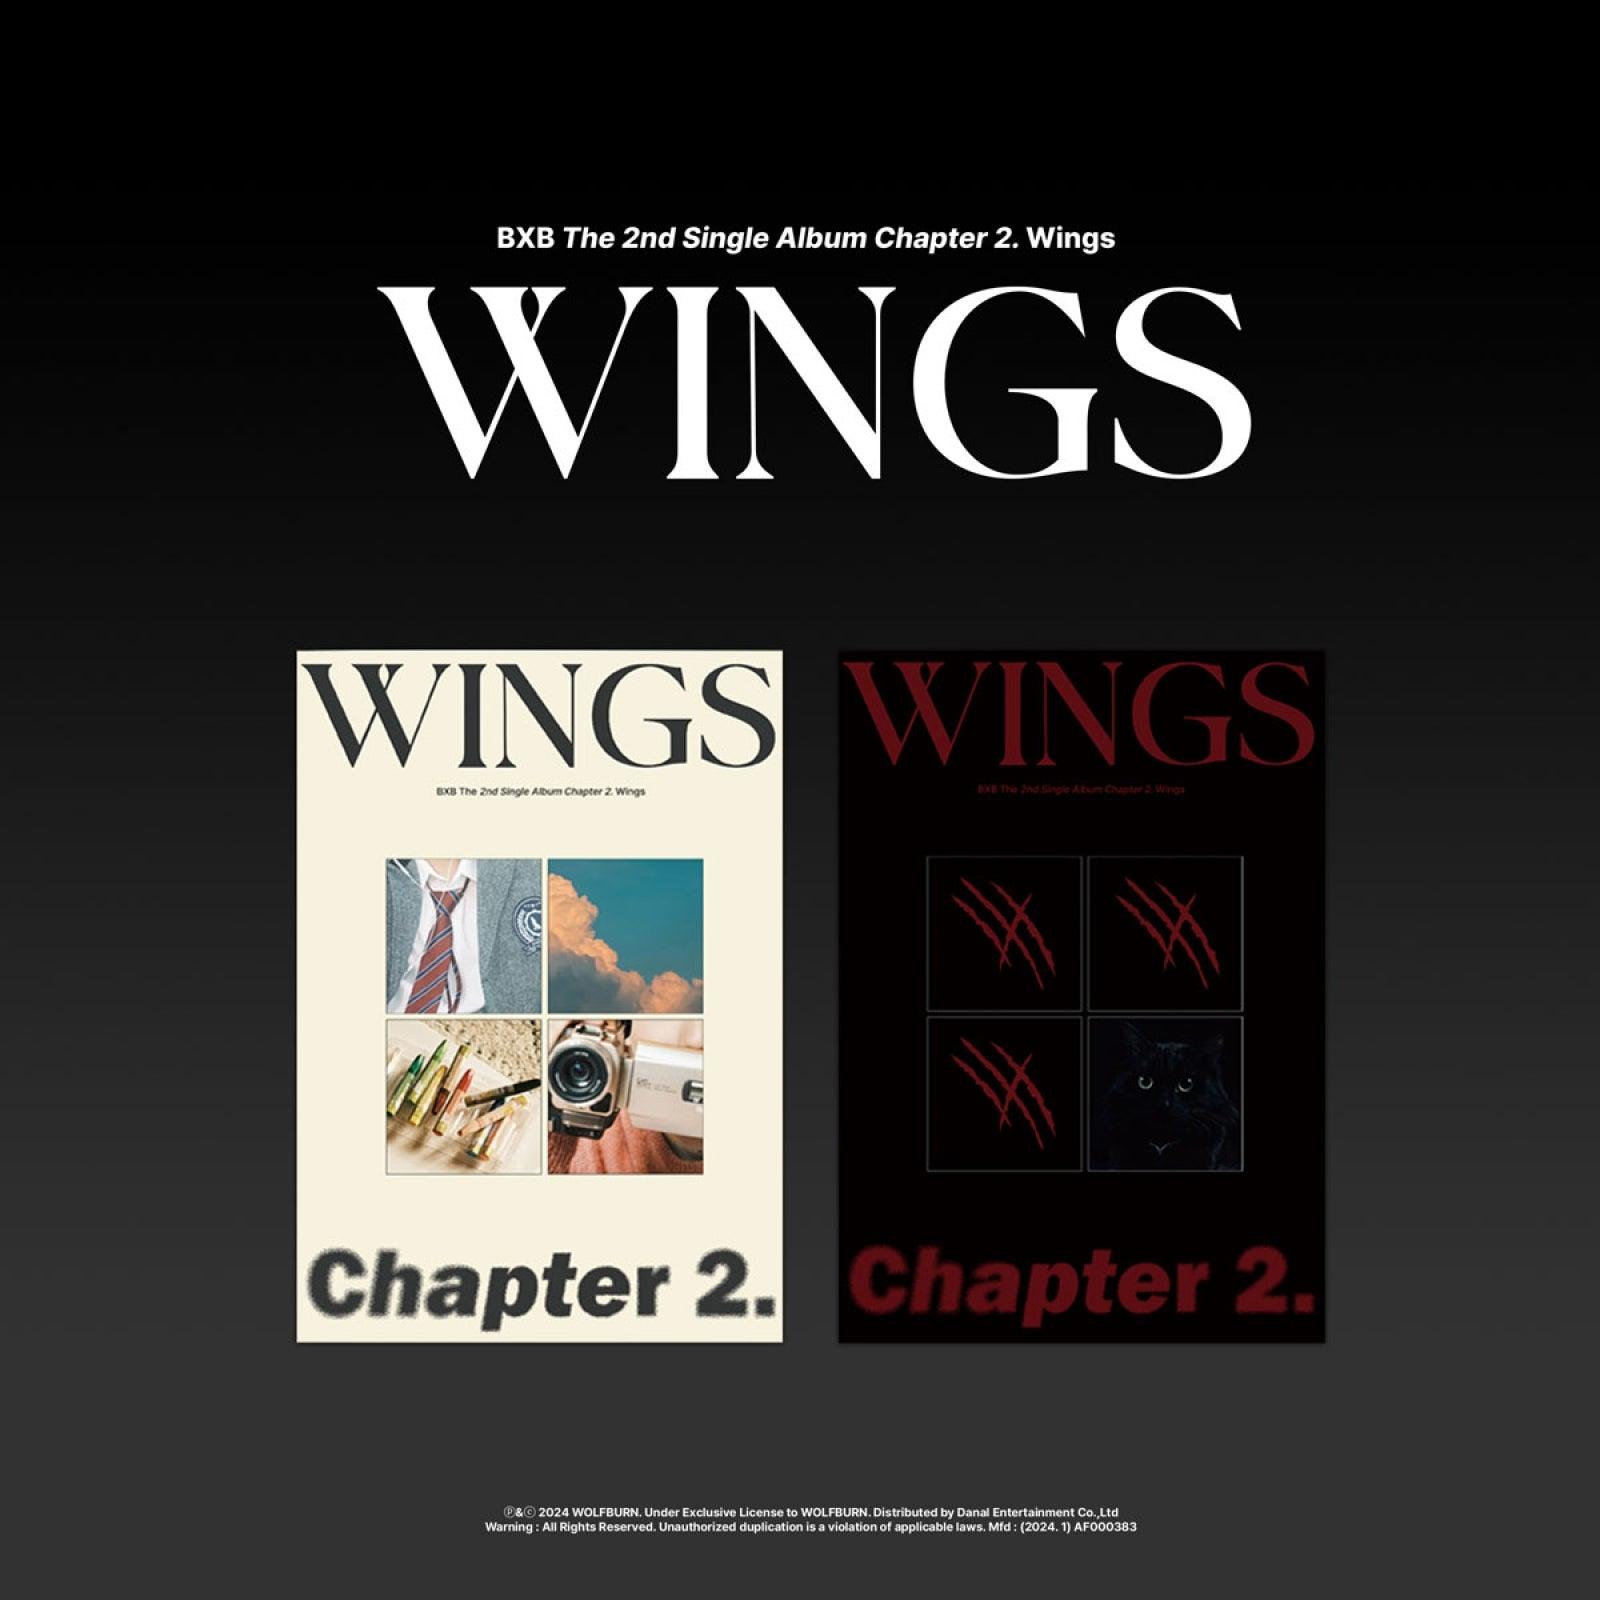 BXB - CHAPTER 2. WINGS / 2ND SINGLE ALBUM - Shopping Around the World with Goodsnjoy